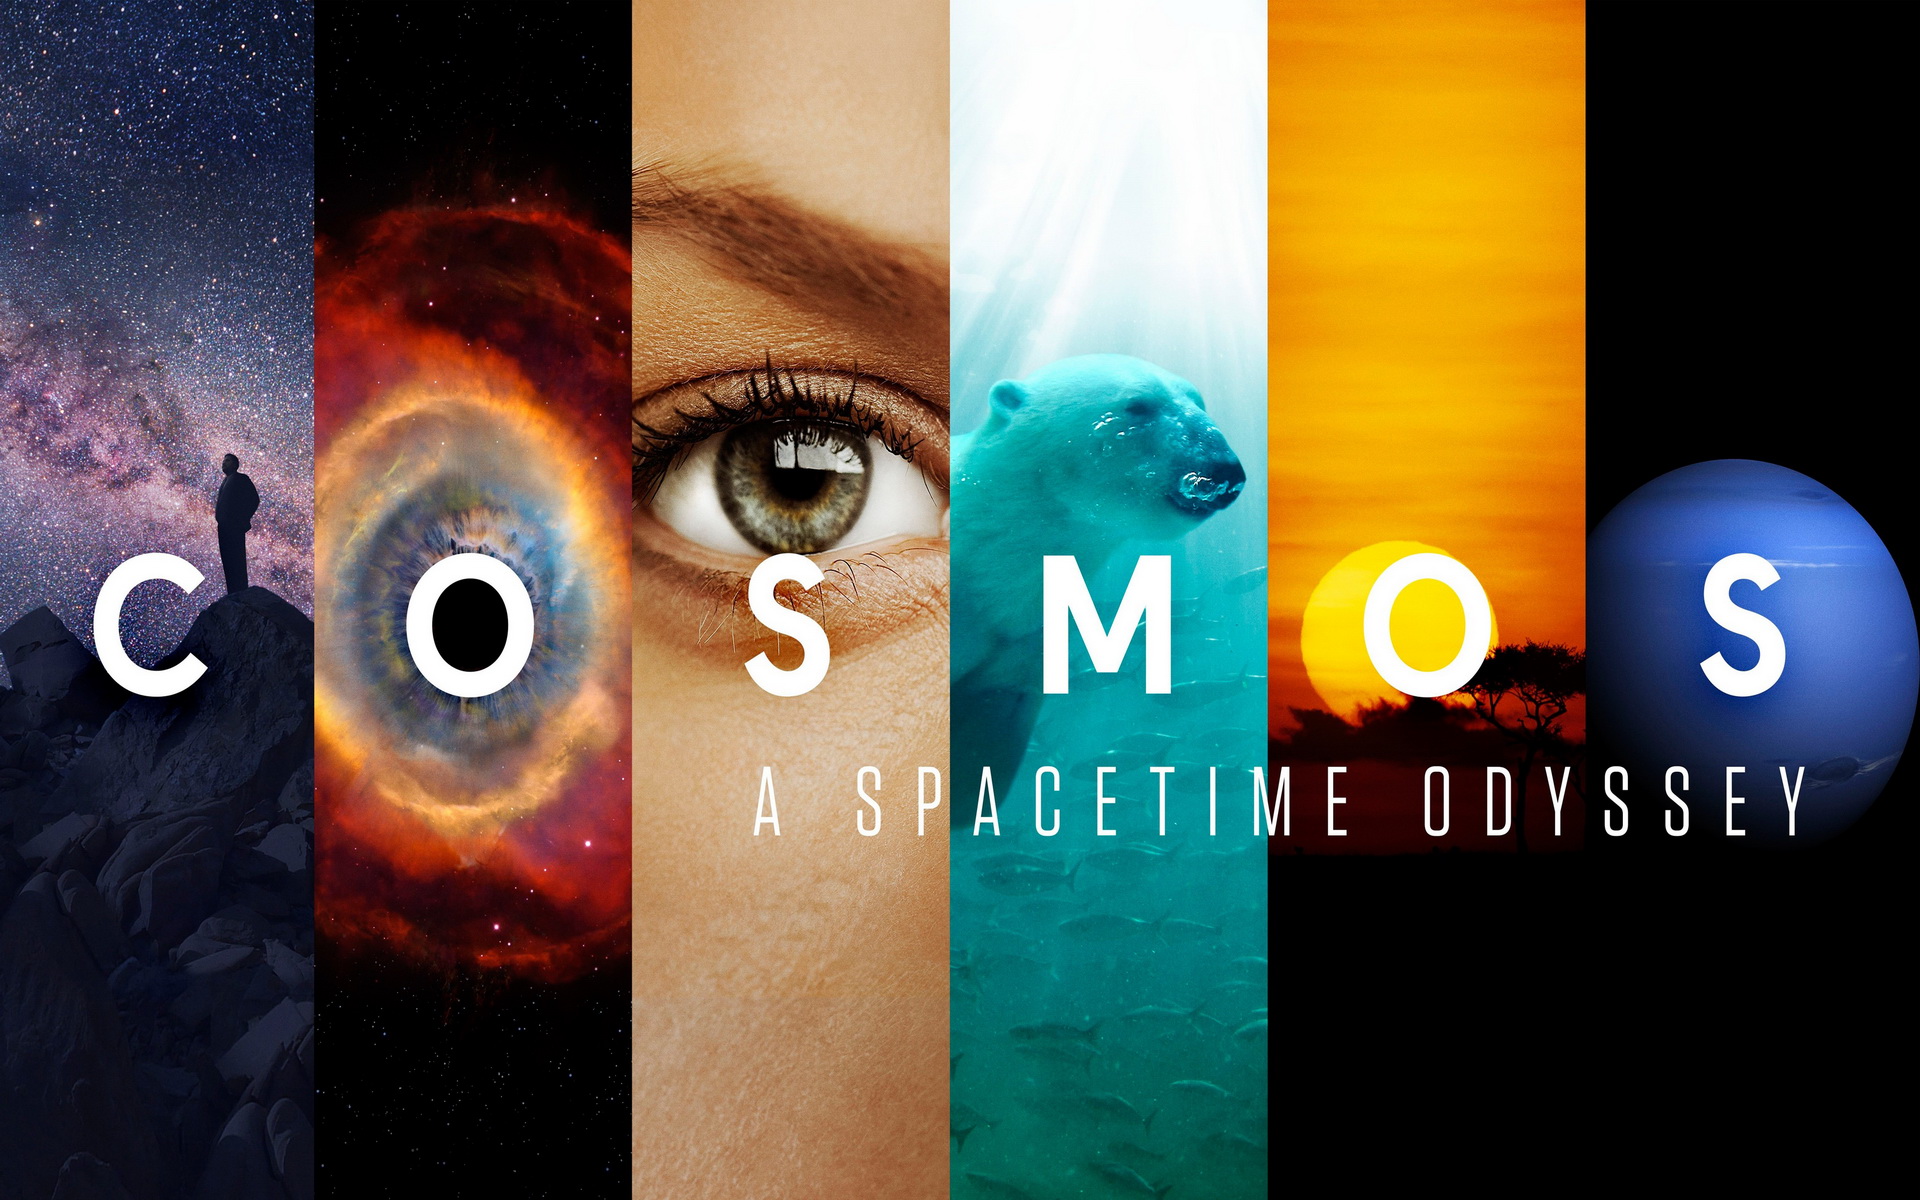 Cosmos: A Spacetime Odyssey Art